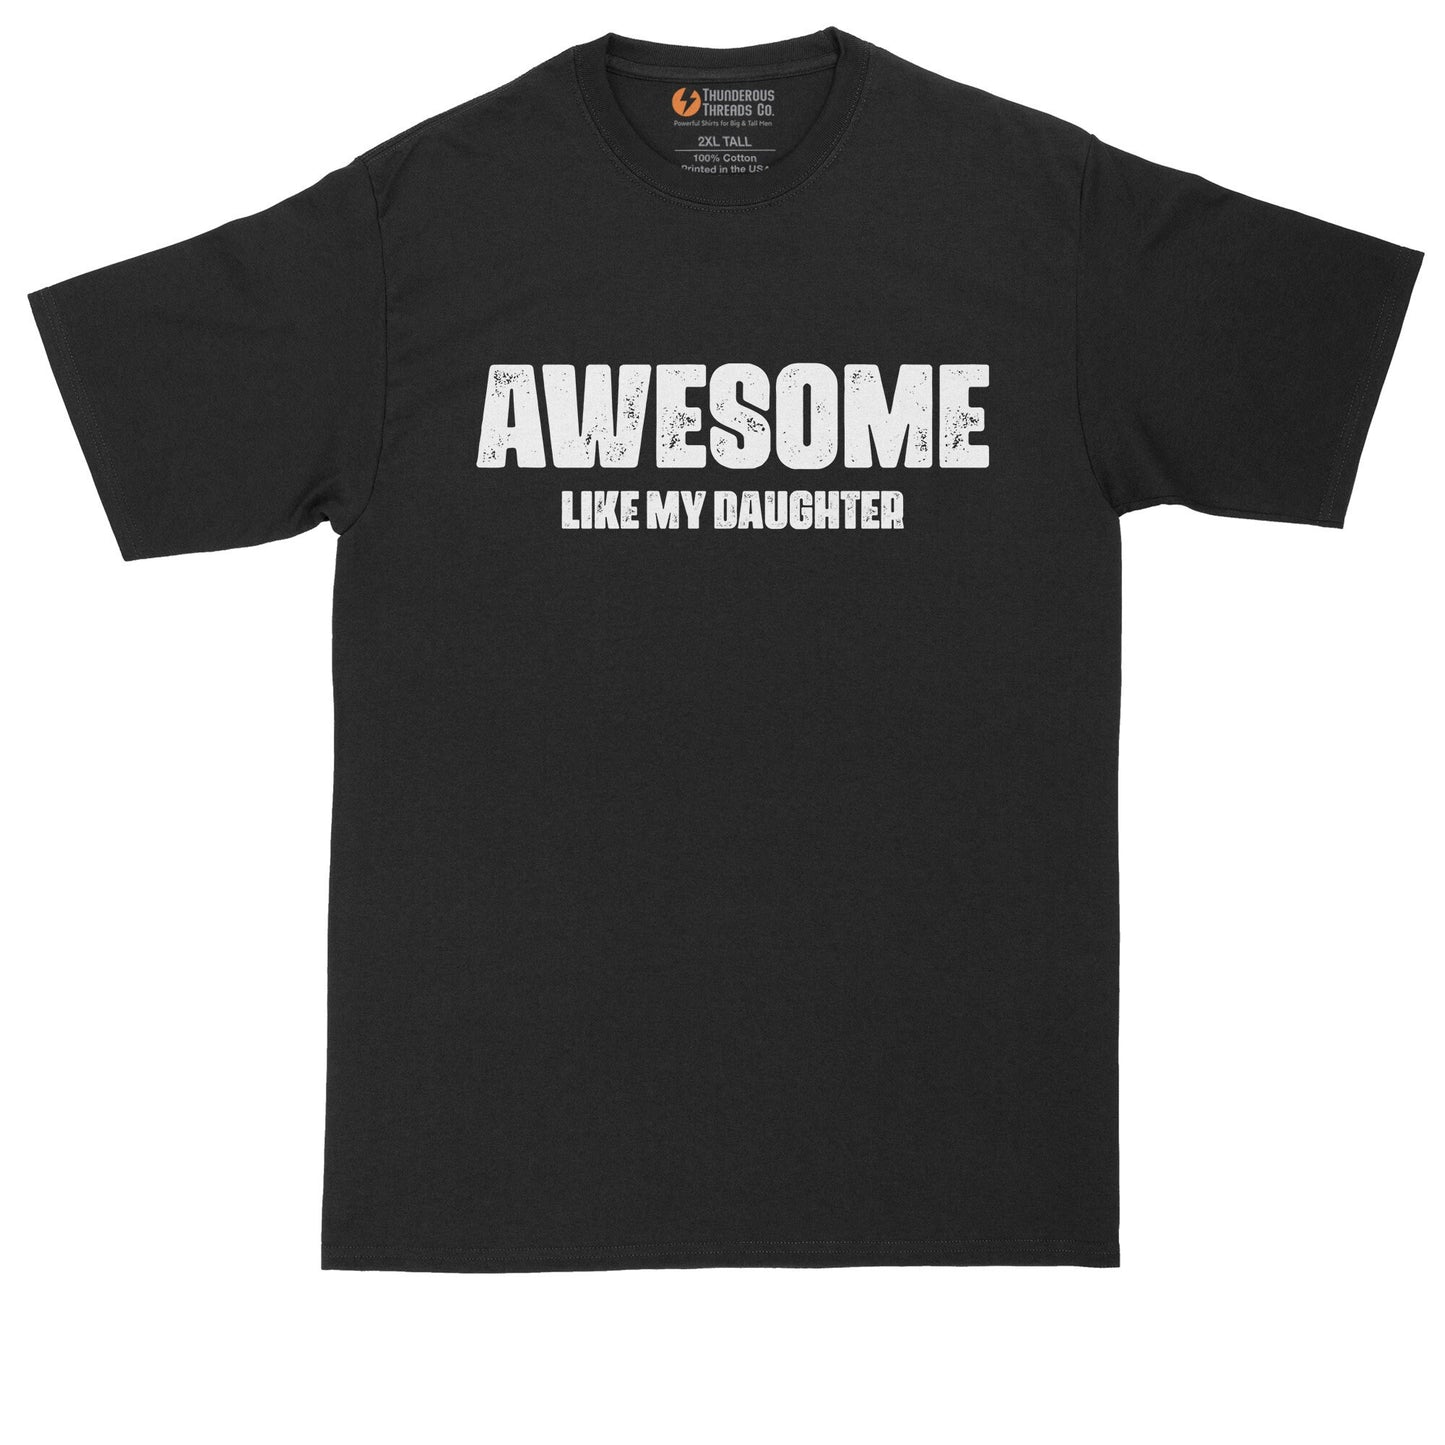 Awesome Like My Daughter | Funny Shirt | Mens Big & Tall T-Shirt